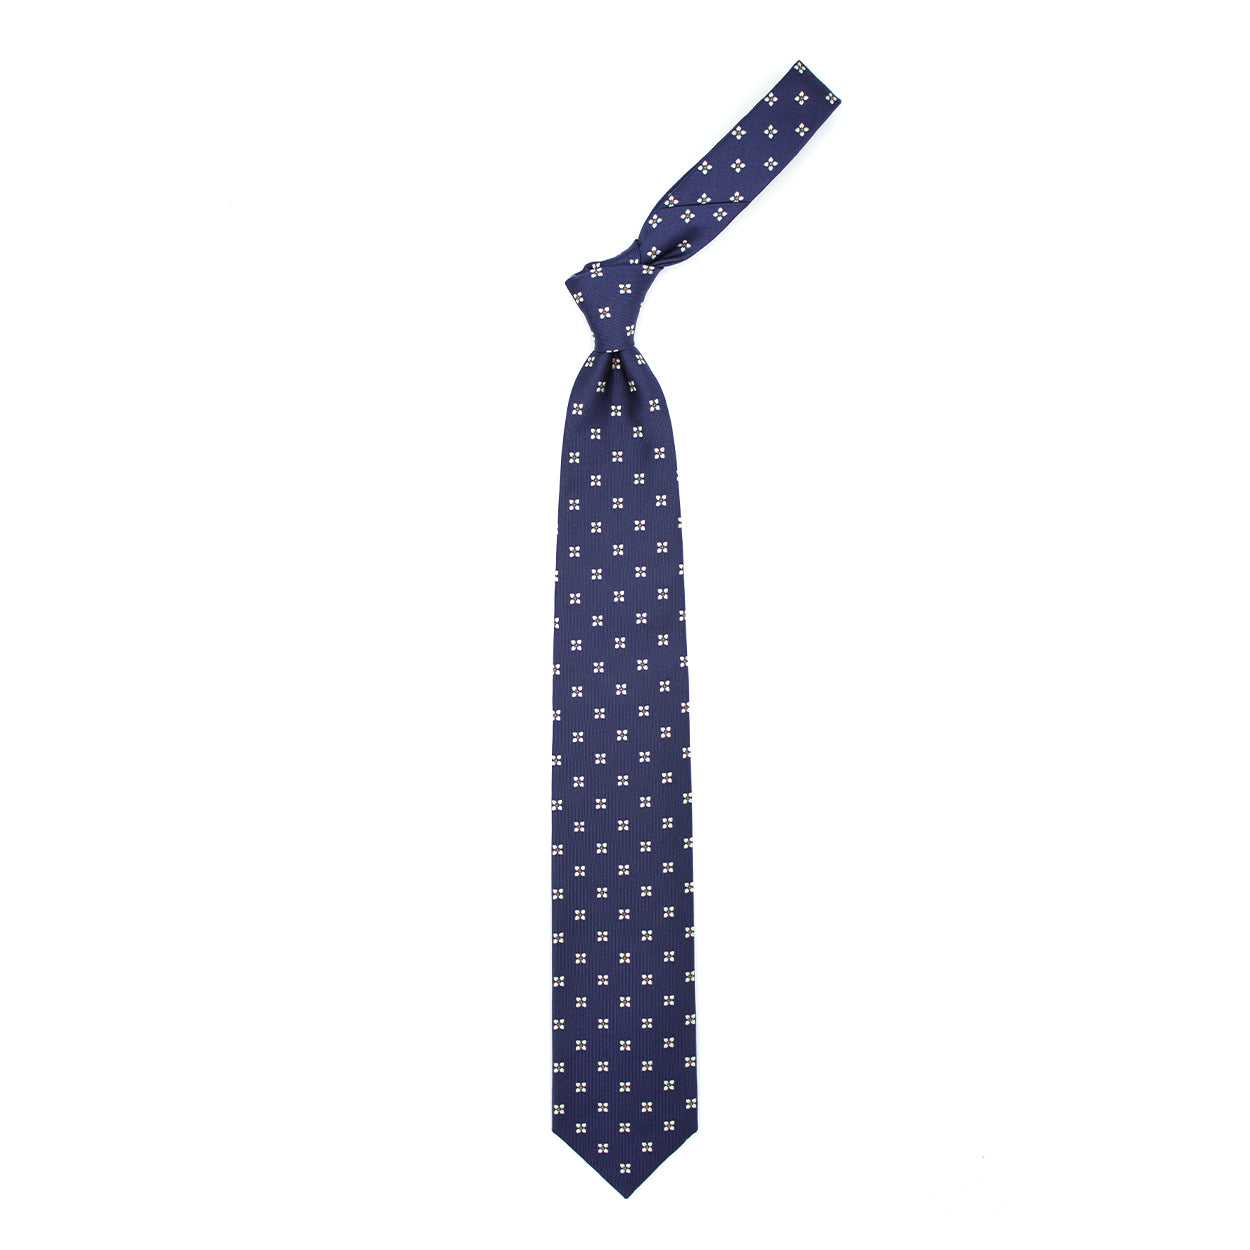 Blue tie with white geometric pattern